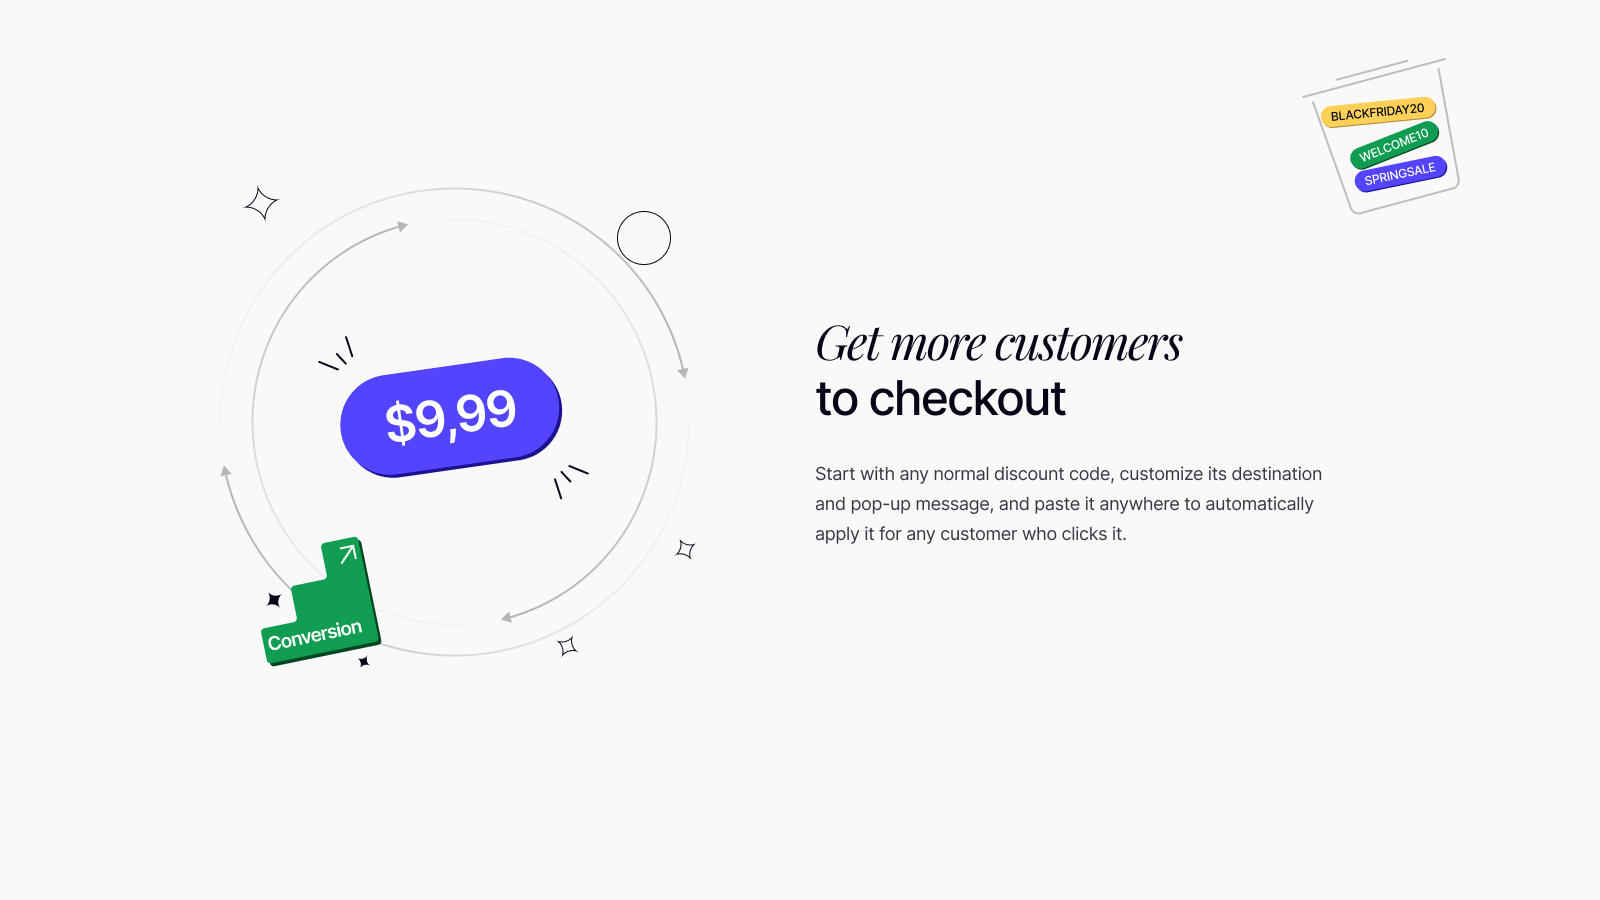 Dynamic updates on the product page